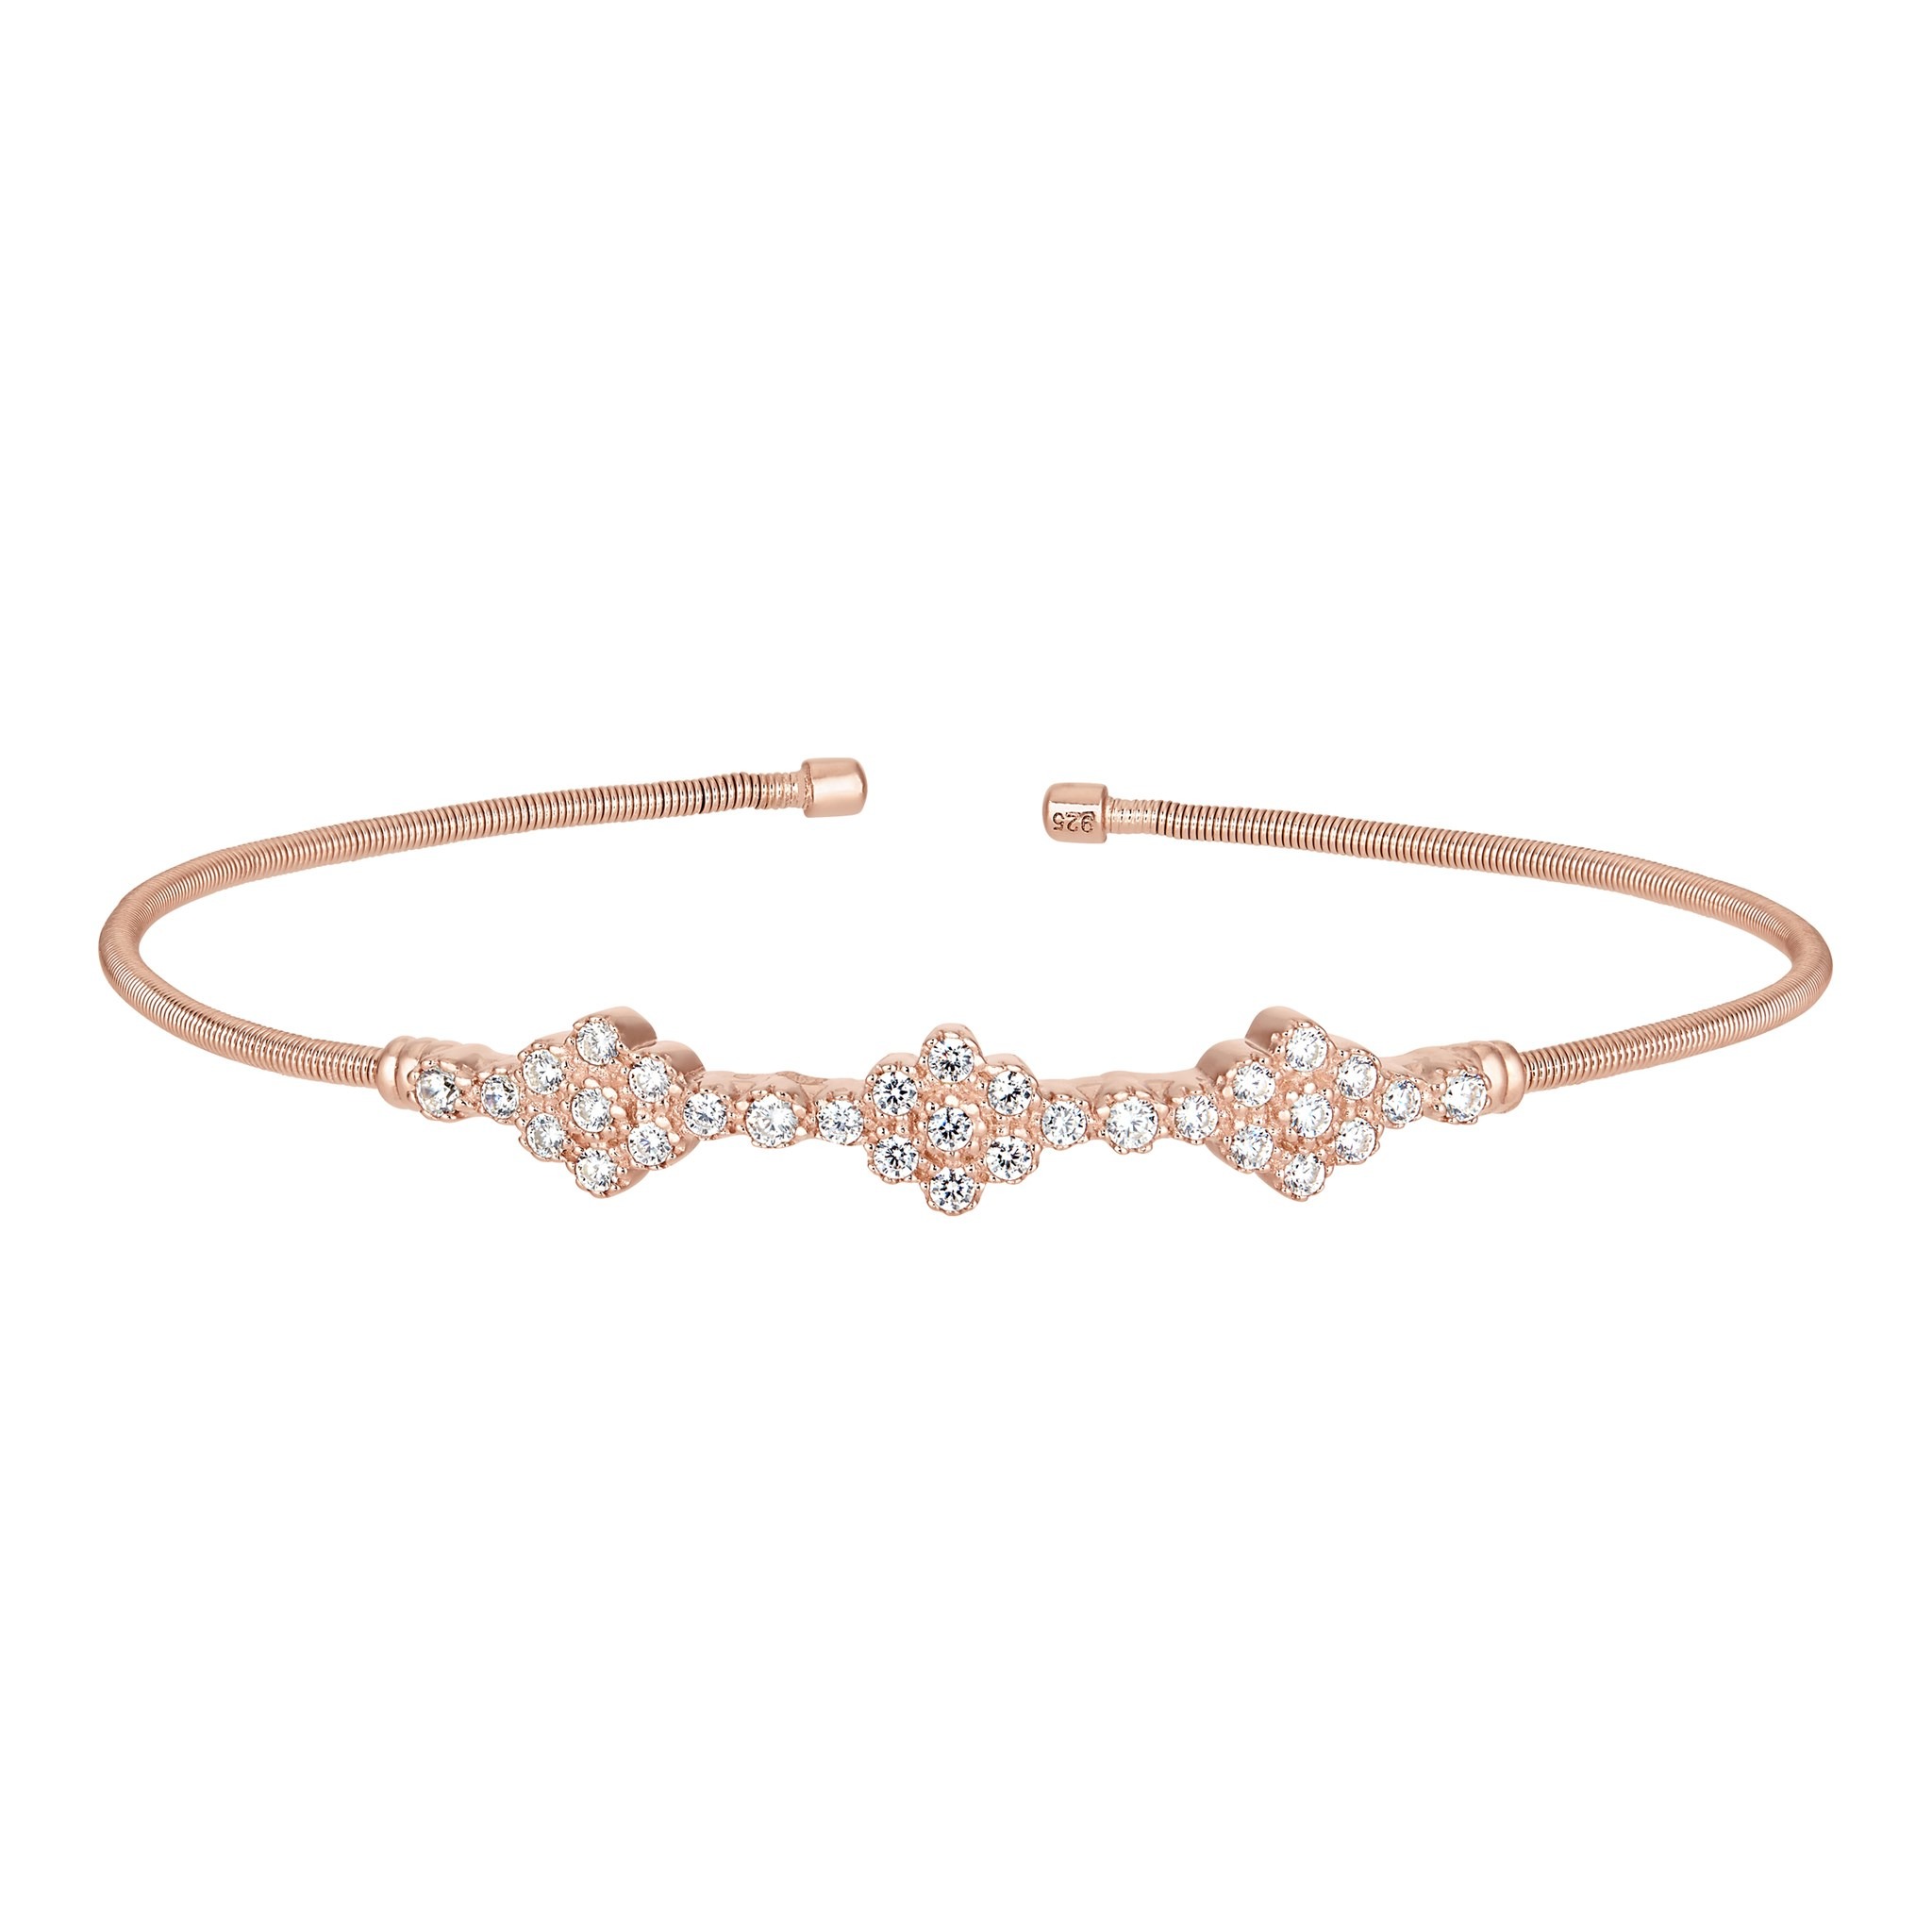 Rose Gold Finish Sterling Silver Cable Cuff Bracelet w/Three Clusters of Simulated Diamonds